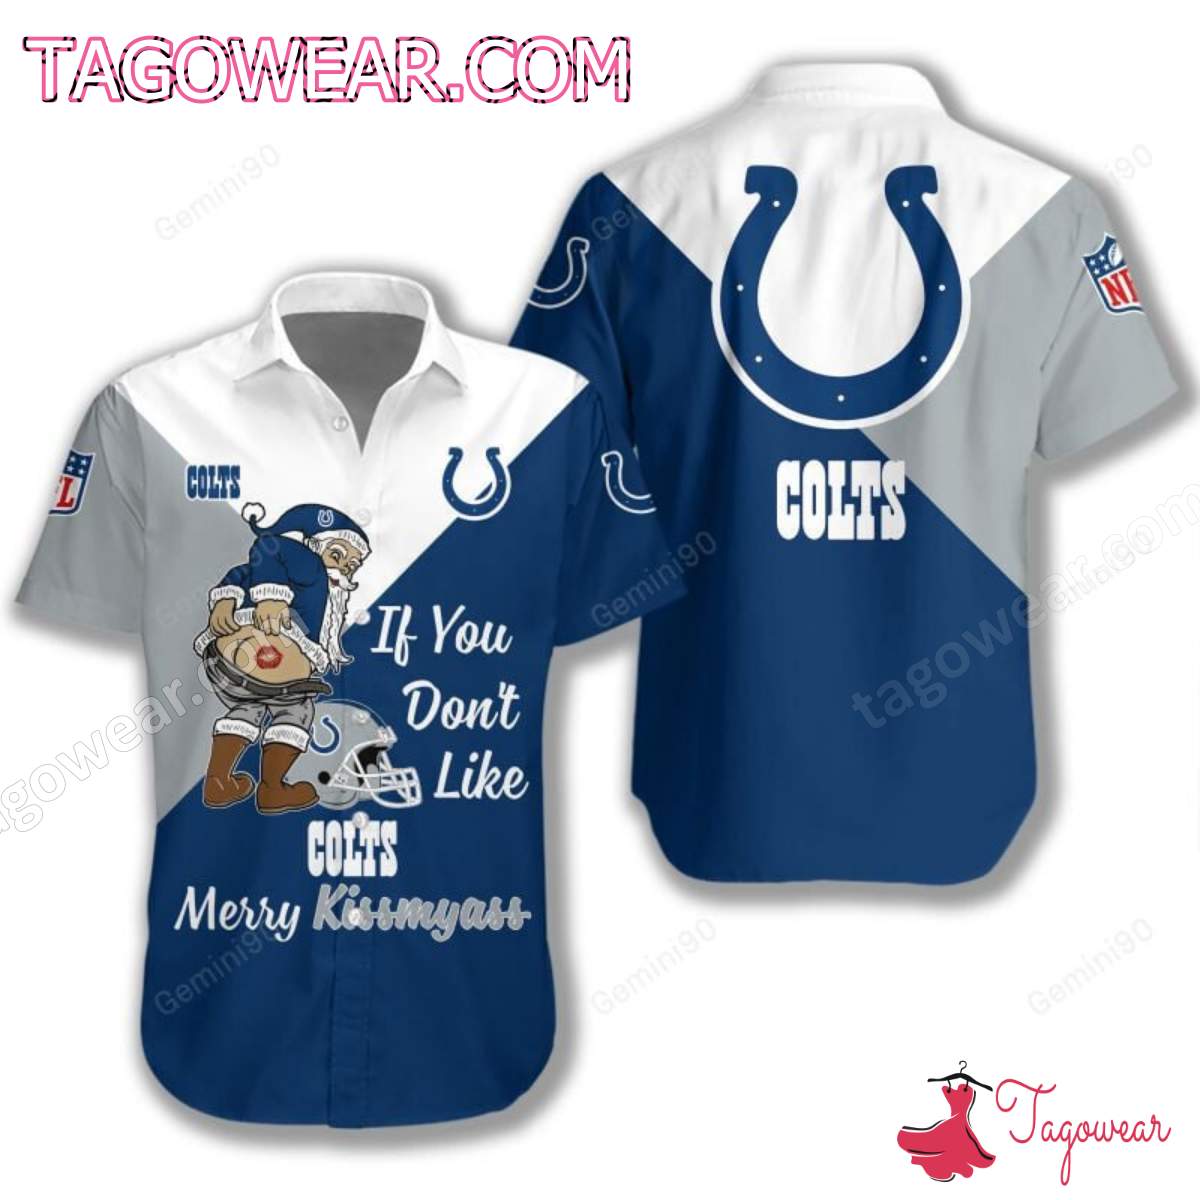 If You Don't Like Indianapolis Colts Merry Kissmyass T-shirt, Polo, Hoodie a